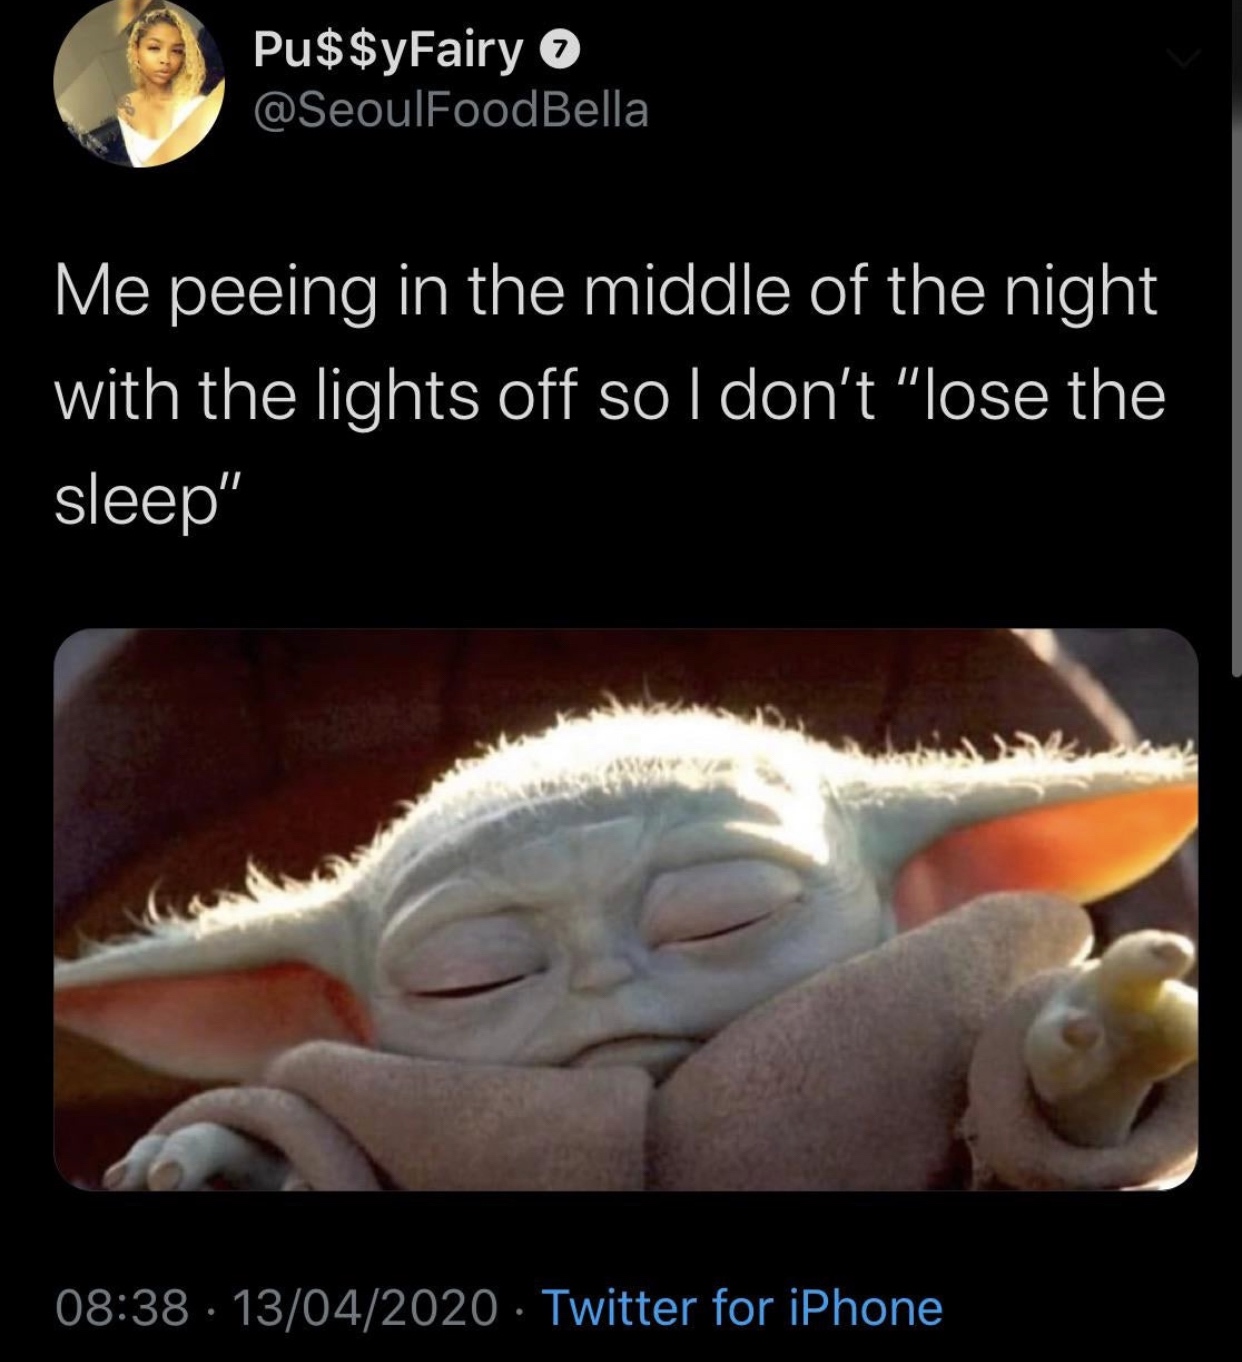 funny memes and tweets - baby yoda meme bf - Pu$$yFairy Me peeing in the middle of the night with the lights off so I don't "lose the sleep" 13042020 Twitter for iPhone